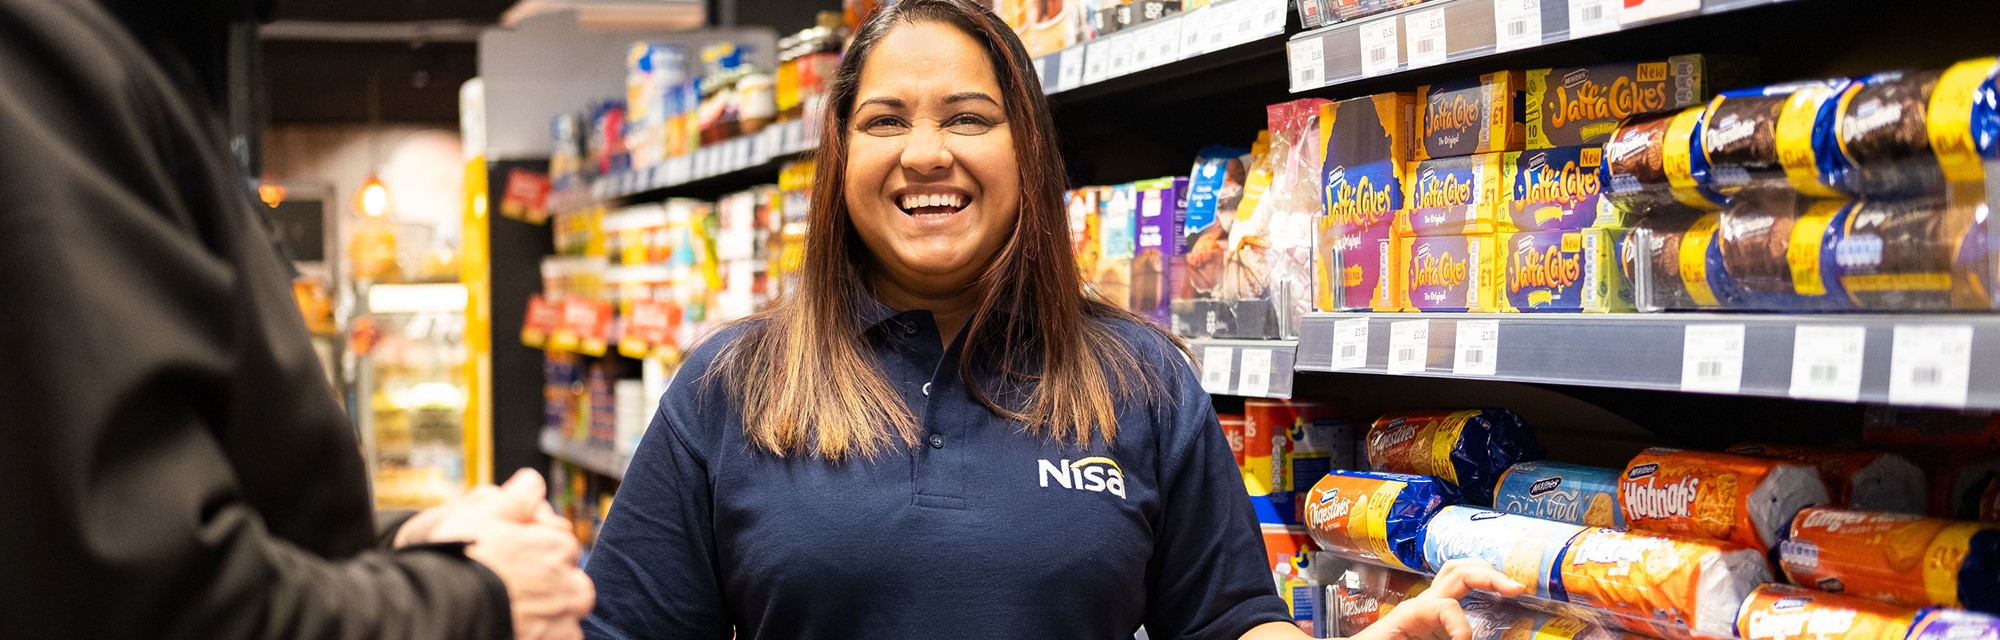 Join Nisa for proven sales know-how - Hero